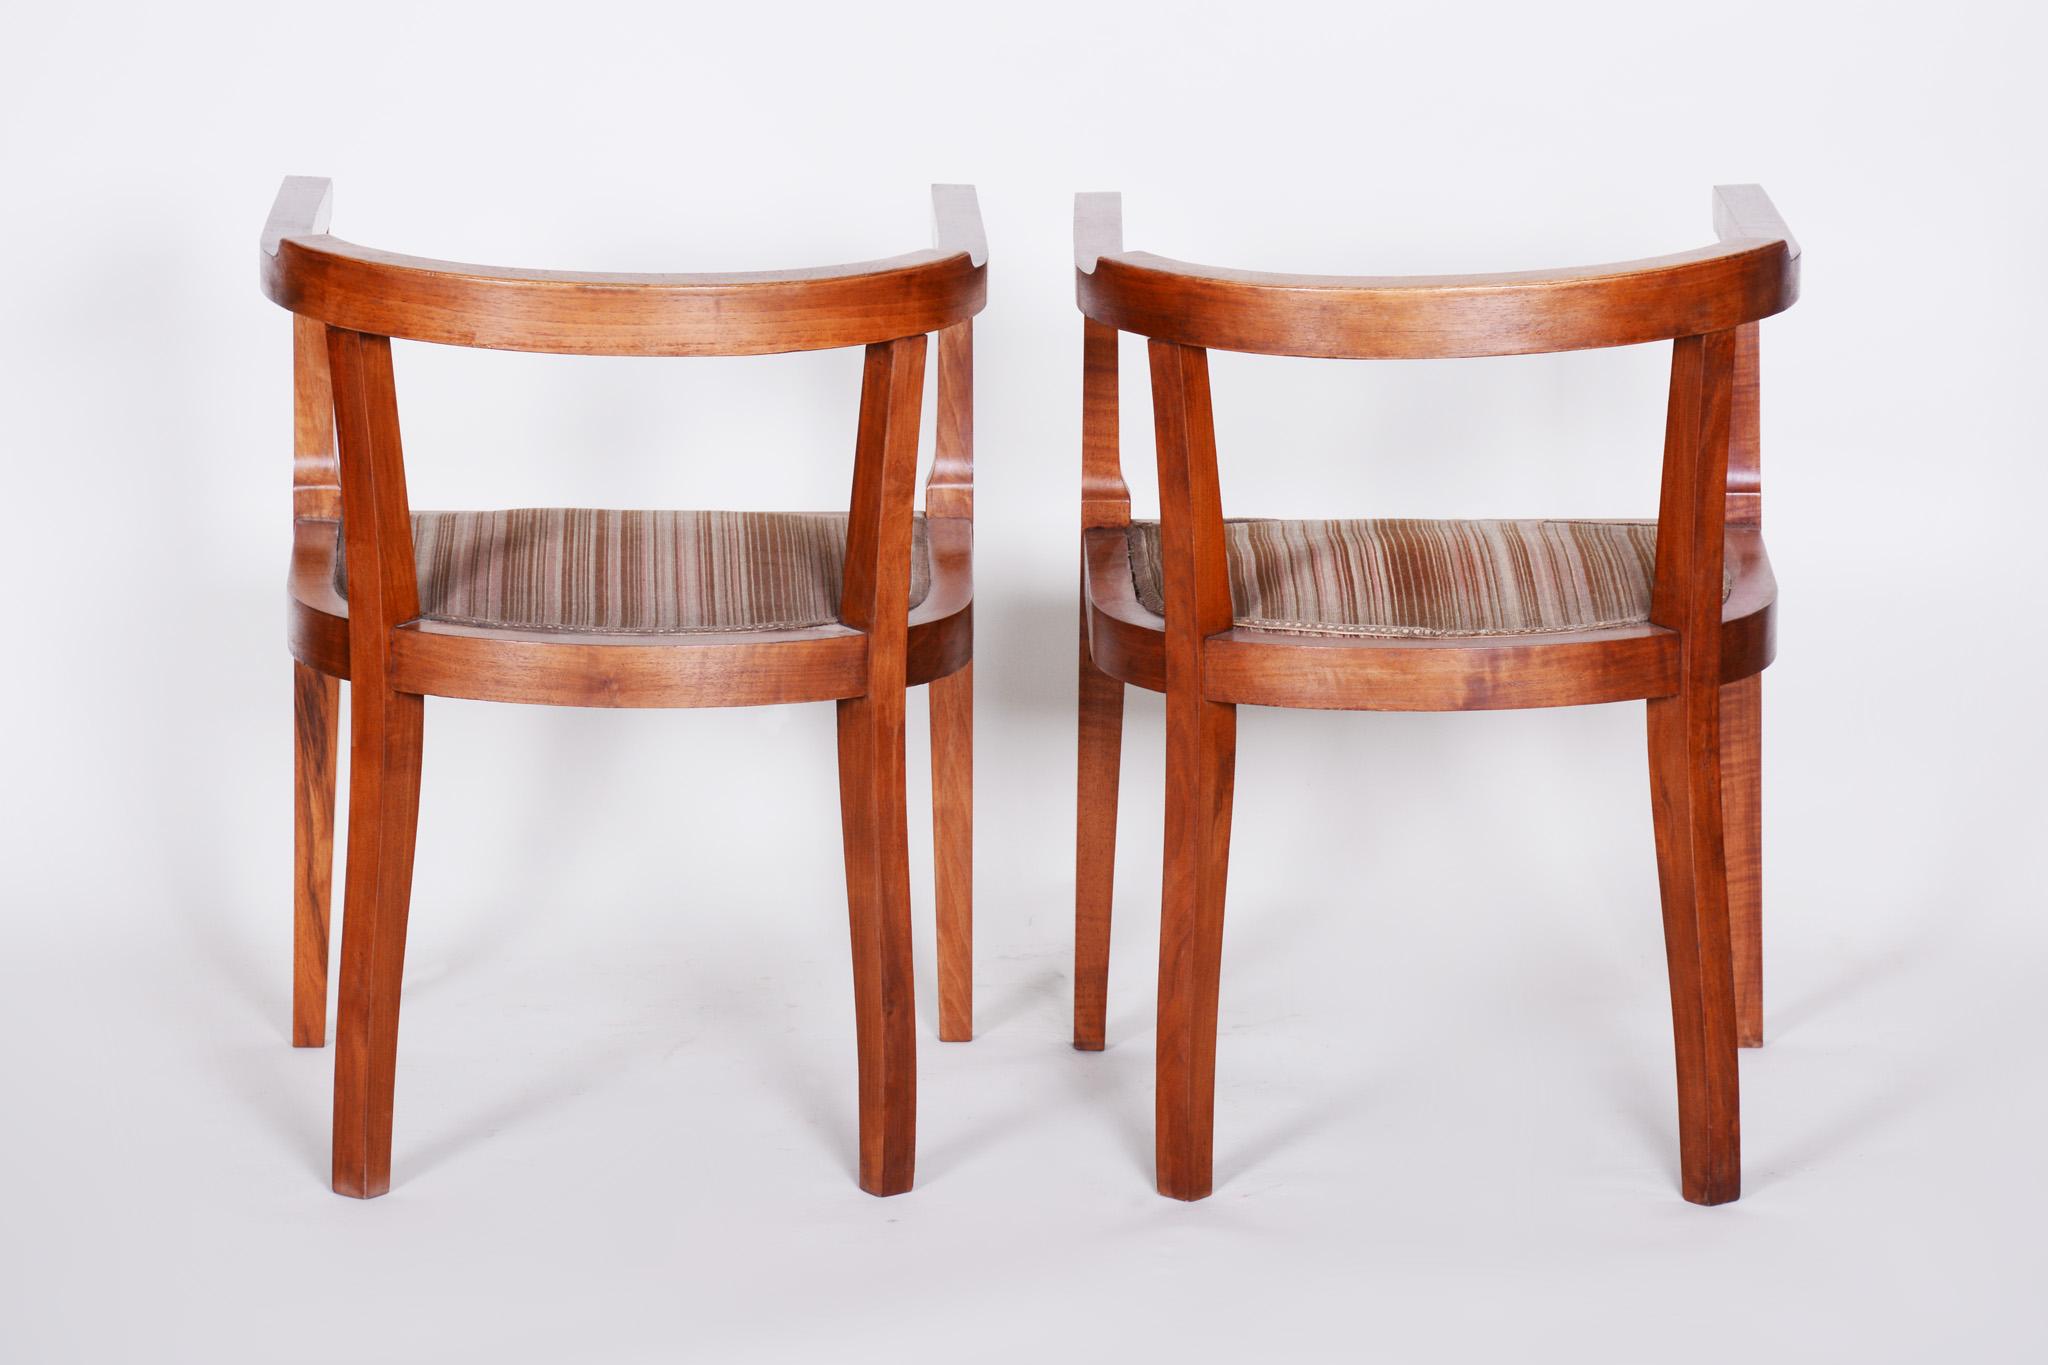 Czech Pair of Walnut Art Deco Armchairs, Original Good Condition, 1920s In Good Condition For Sale In Horomerice, CZ